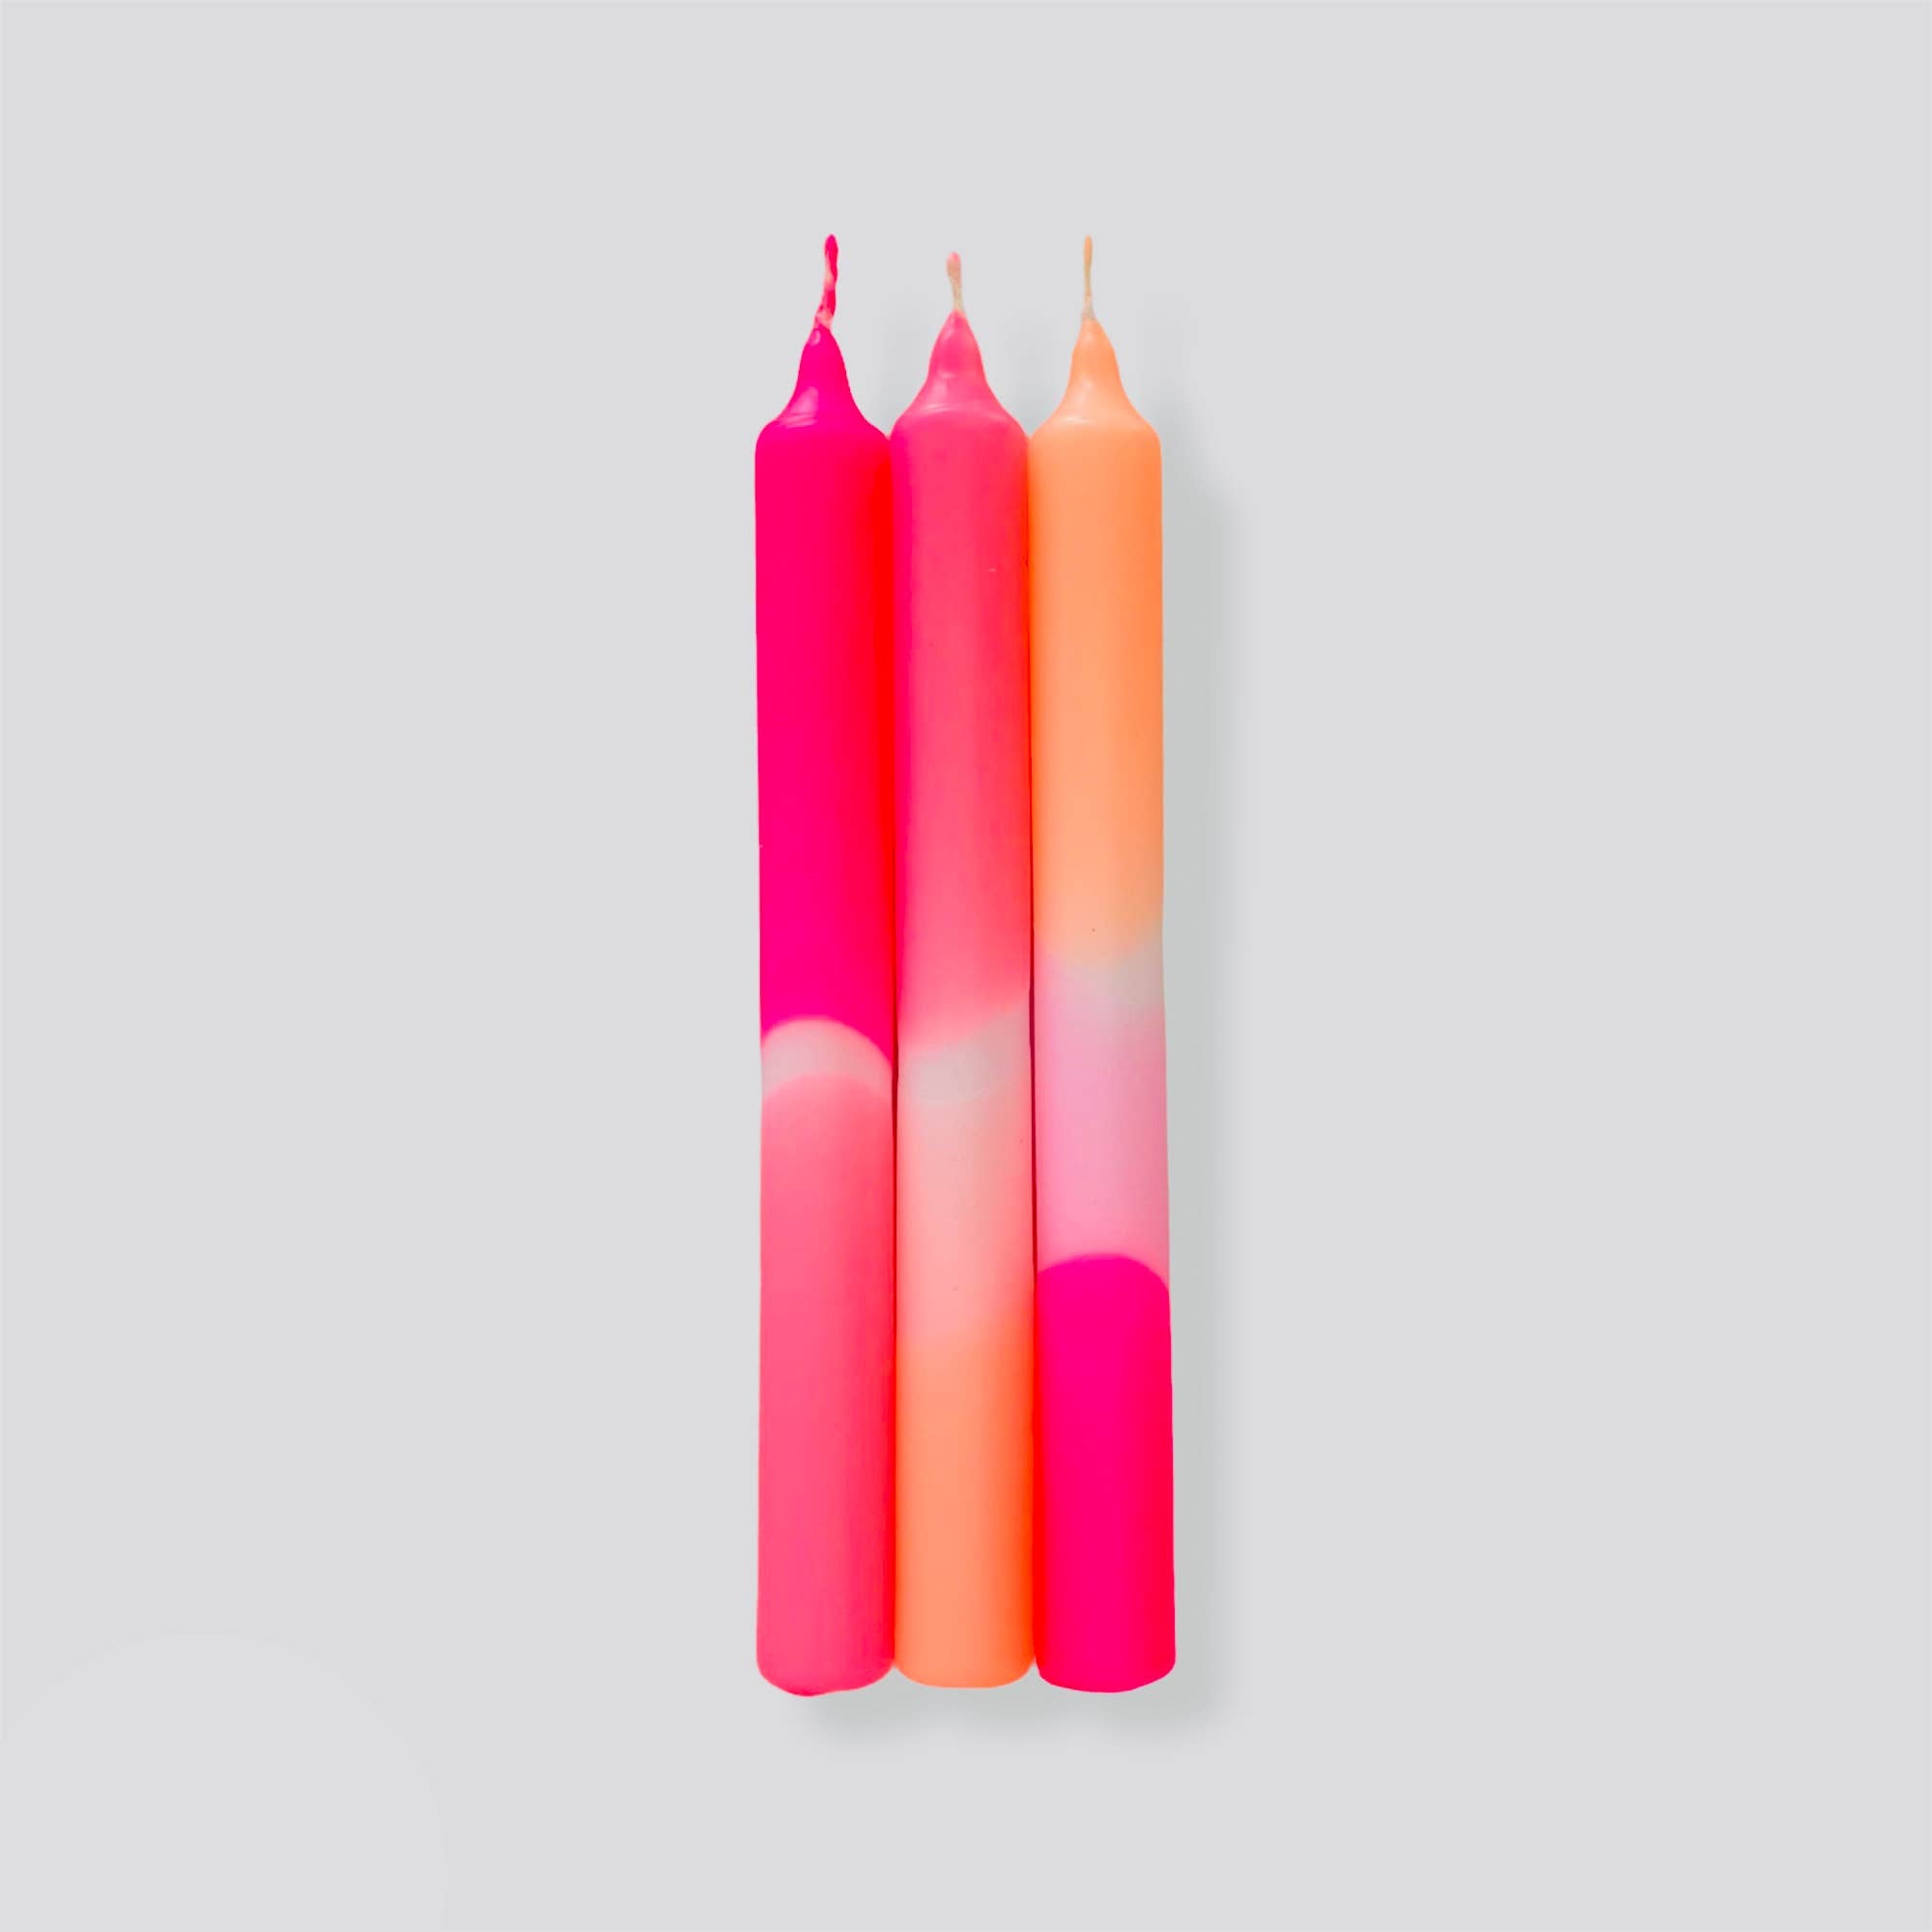 Flamingo Dreams Dip Dye Neon Set of 3 by Pink Stories. pink and orange neon candles